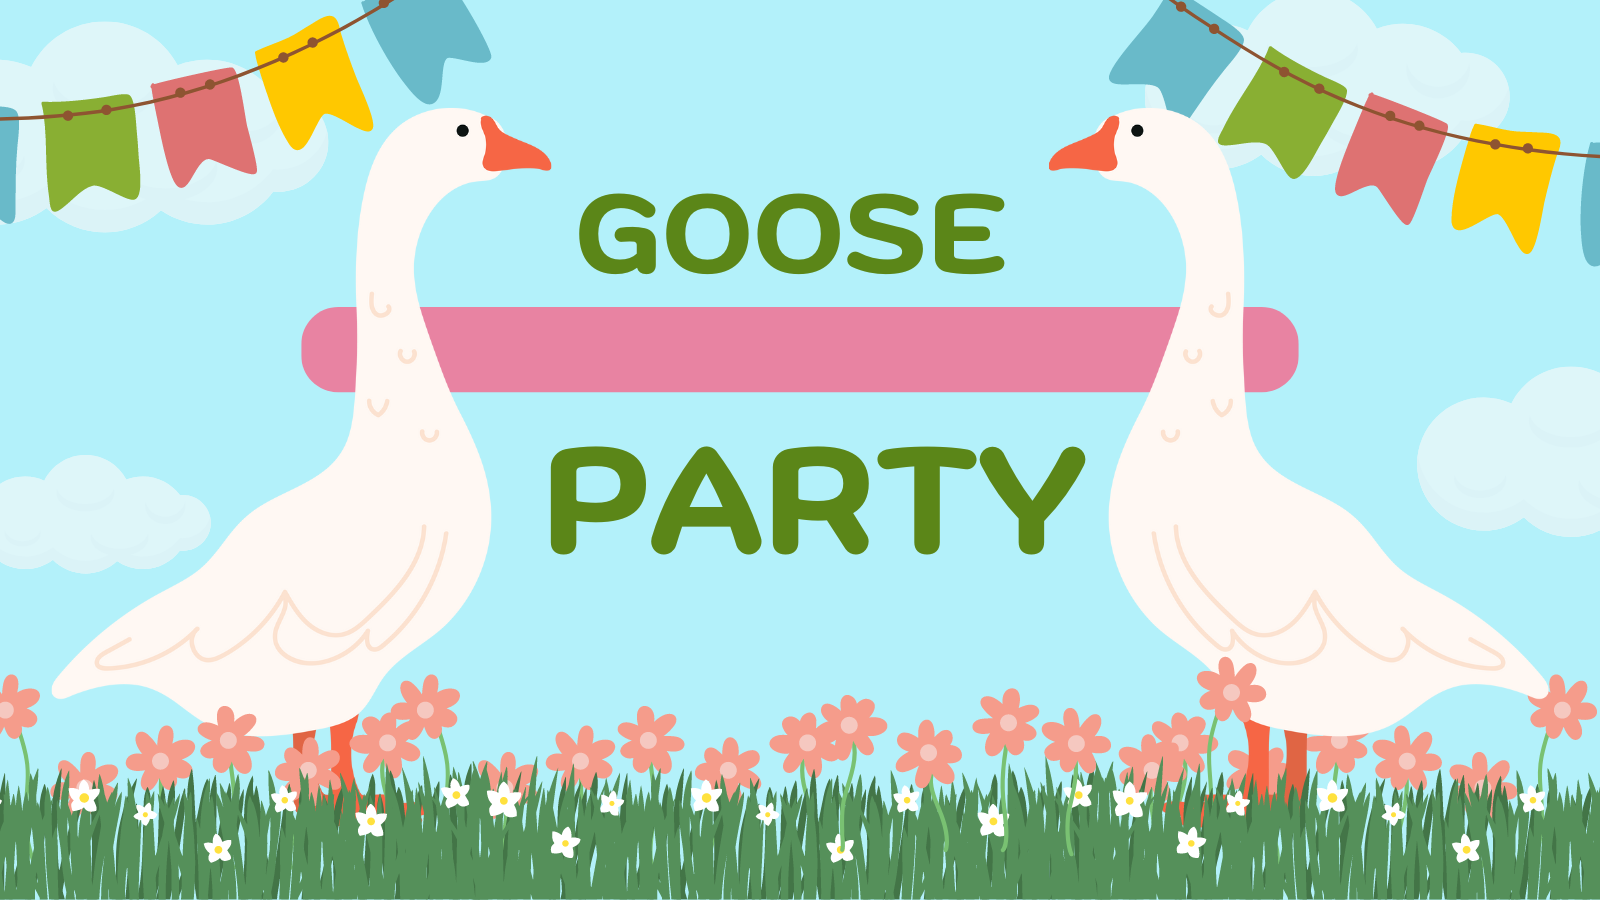 "Goose Party" with two tall geese beside the words, flowers with grass along the bottom, and colorful banners across the top. 